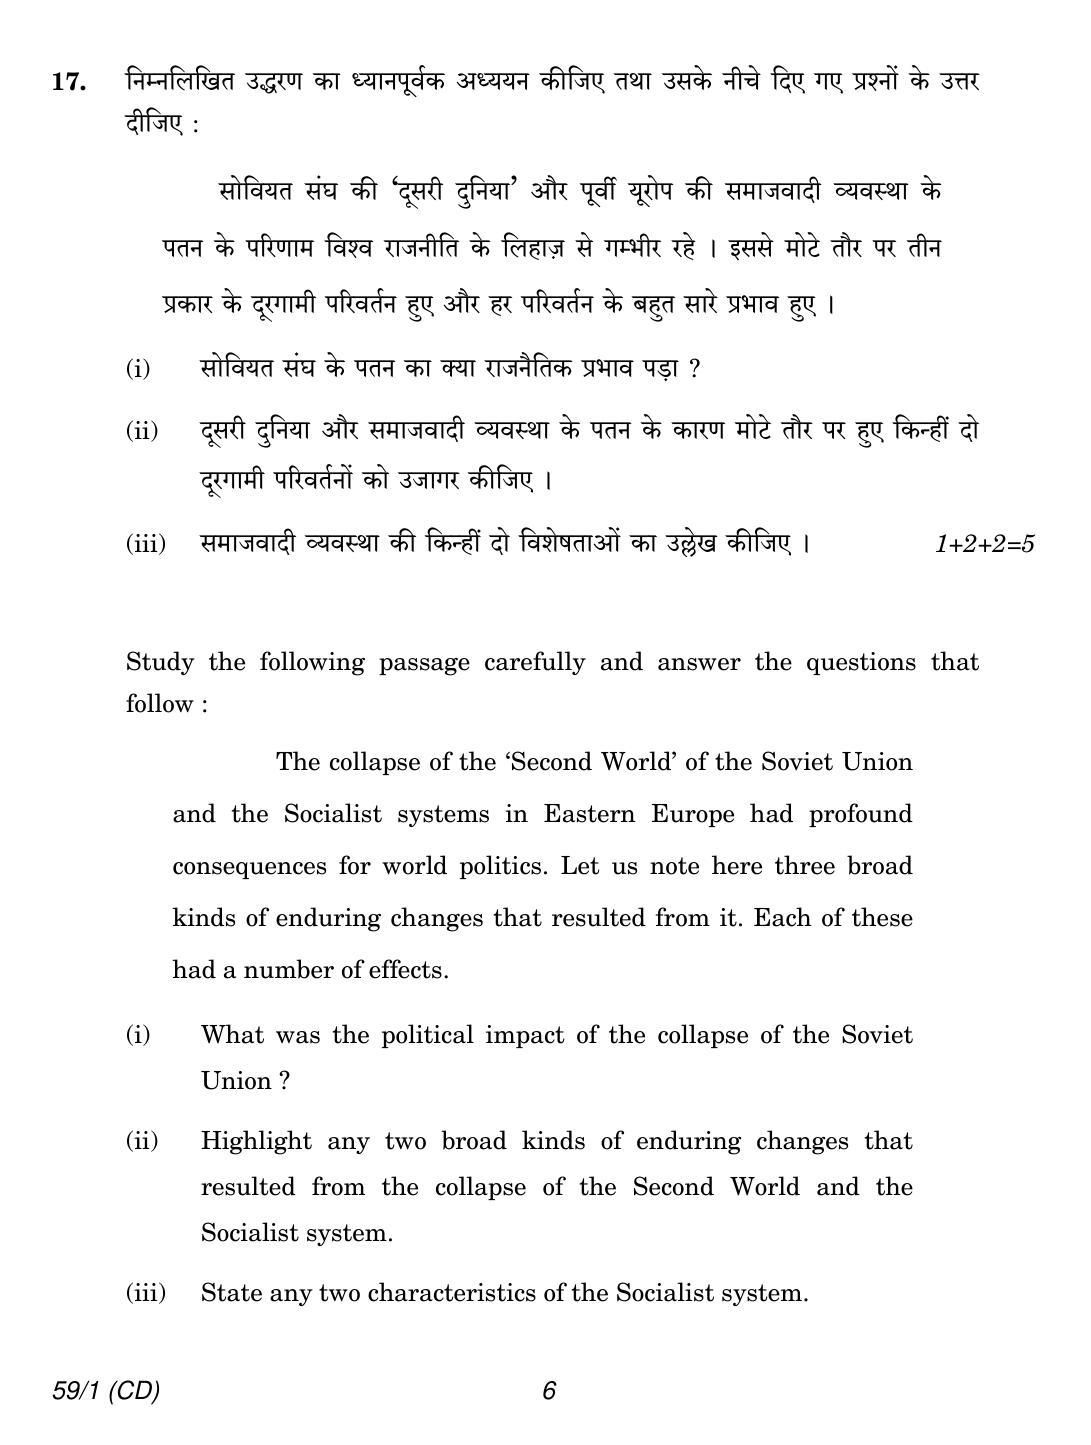 CBSE Class 12 59-1 POLITICAL SCIENCE CD 2018 Question Paper - Page 6